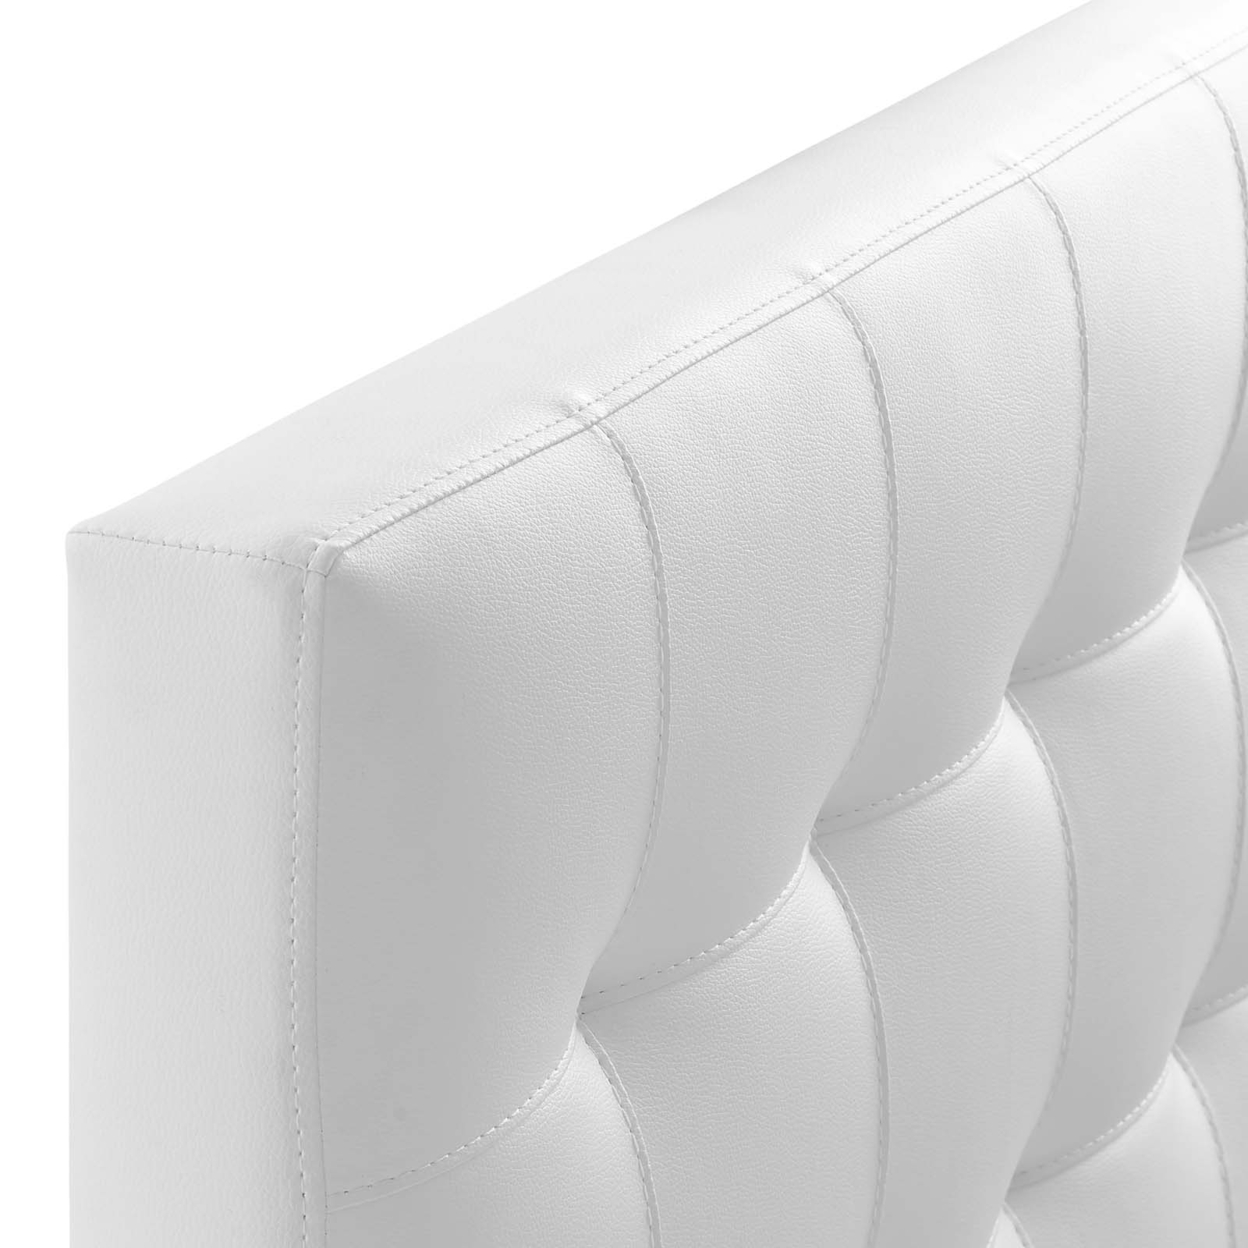 Modway Lily Twin Upholstered Faux Leather and Wood Headboard in White - image 3 of 5